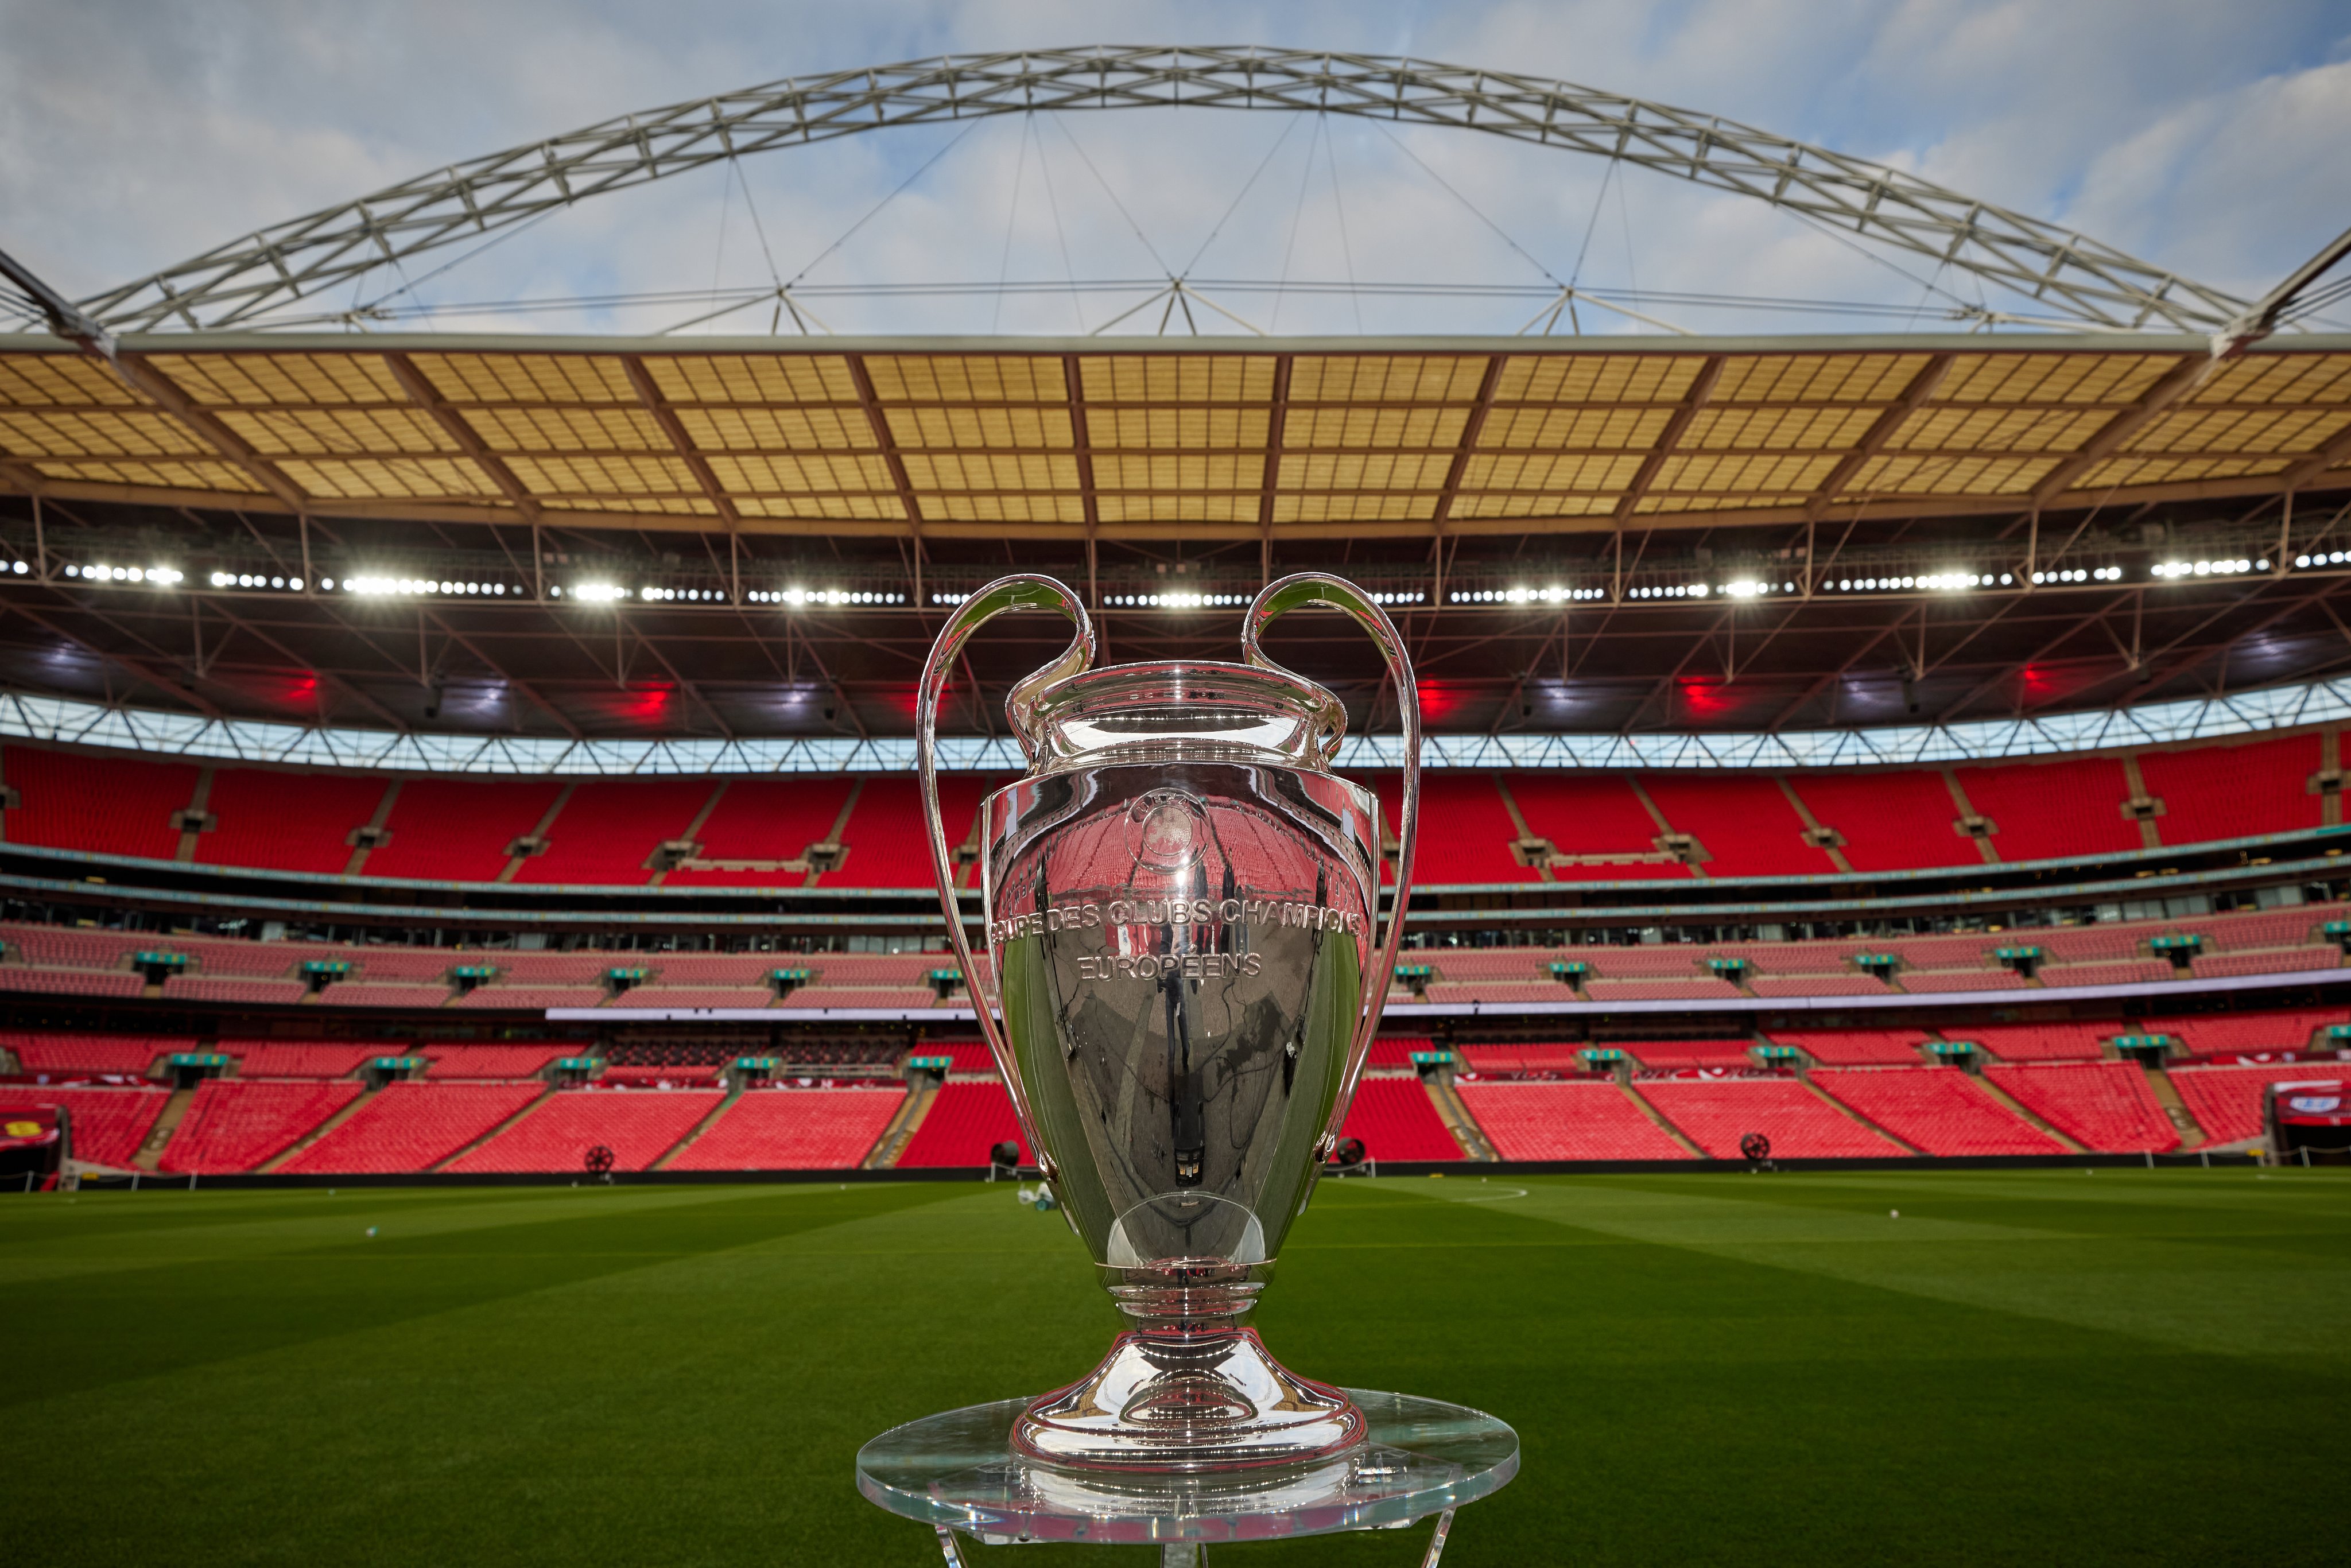 How to buy Champions League tickets to follow Arsenal and Man City to London